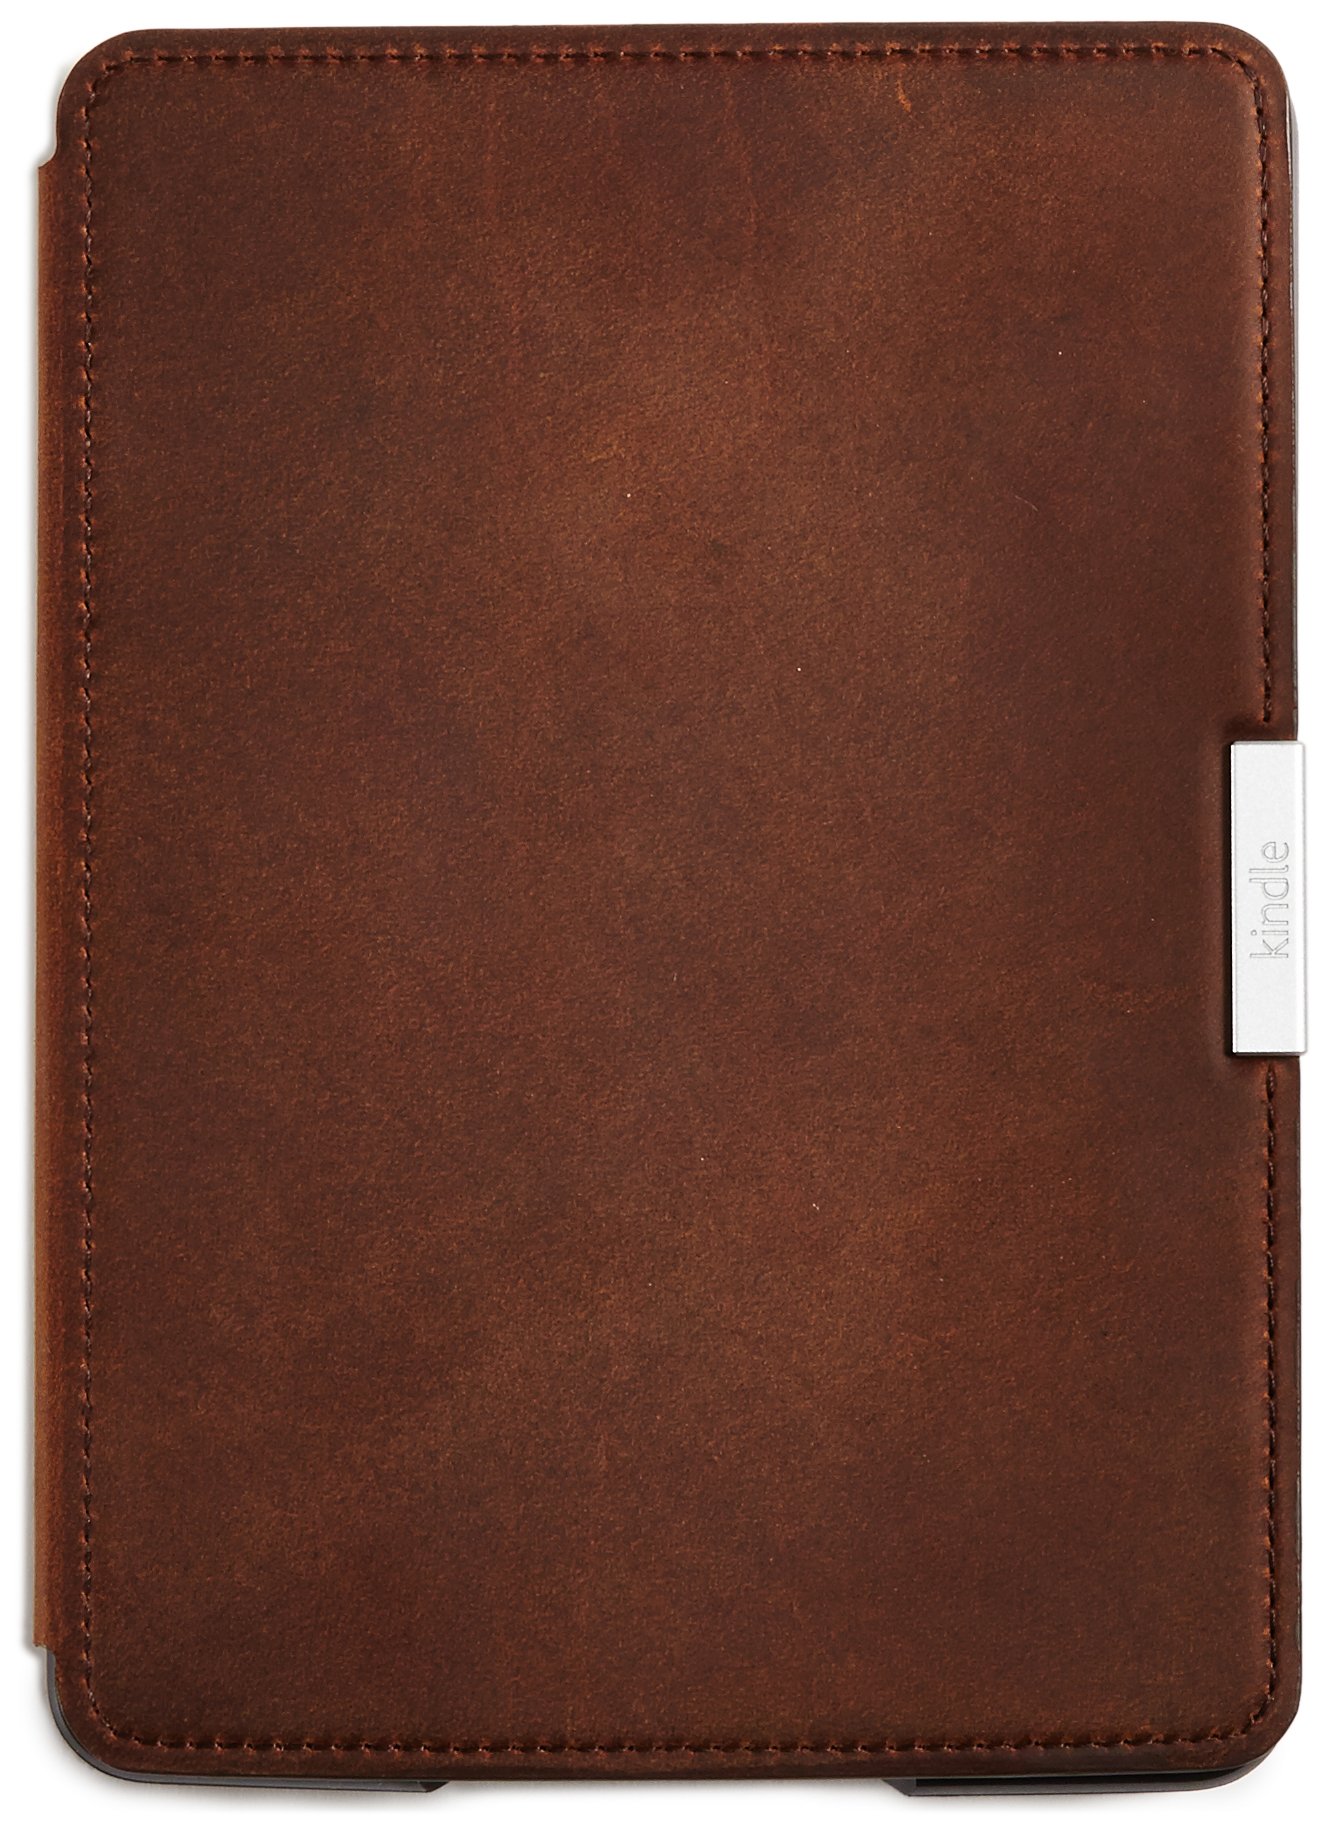 Limited Edition Premium Leather Cover for Kindle Paperwhite - fits all Paperwhite generations prior to 2018 (Will not fit All-new Paperwhite 10th generation)